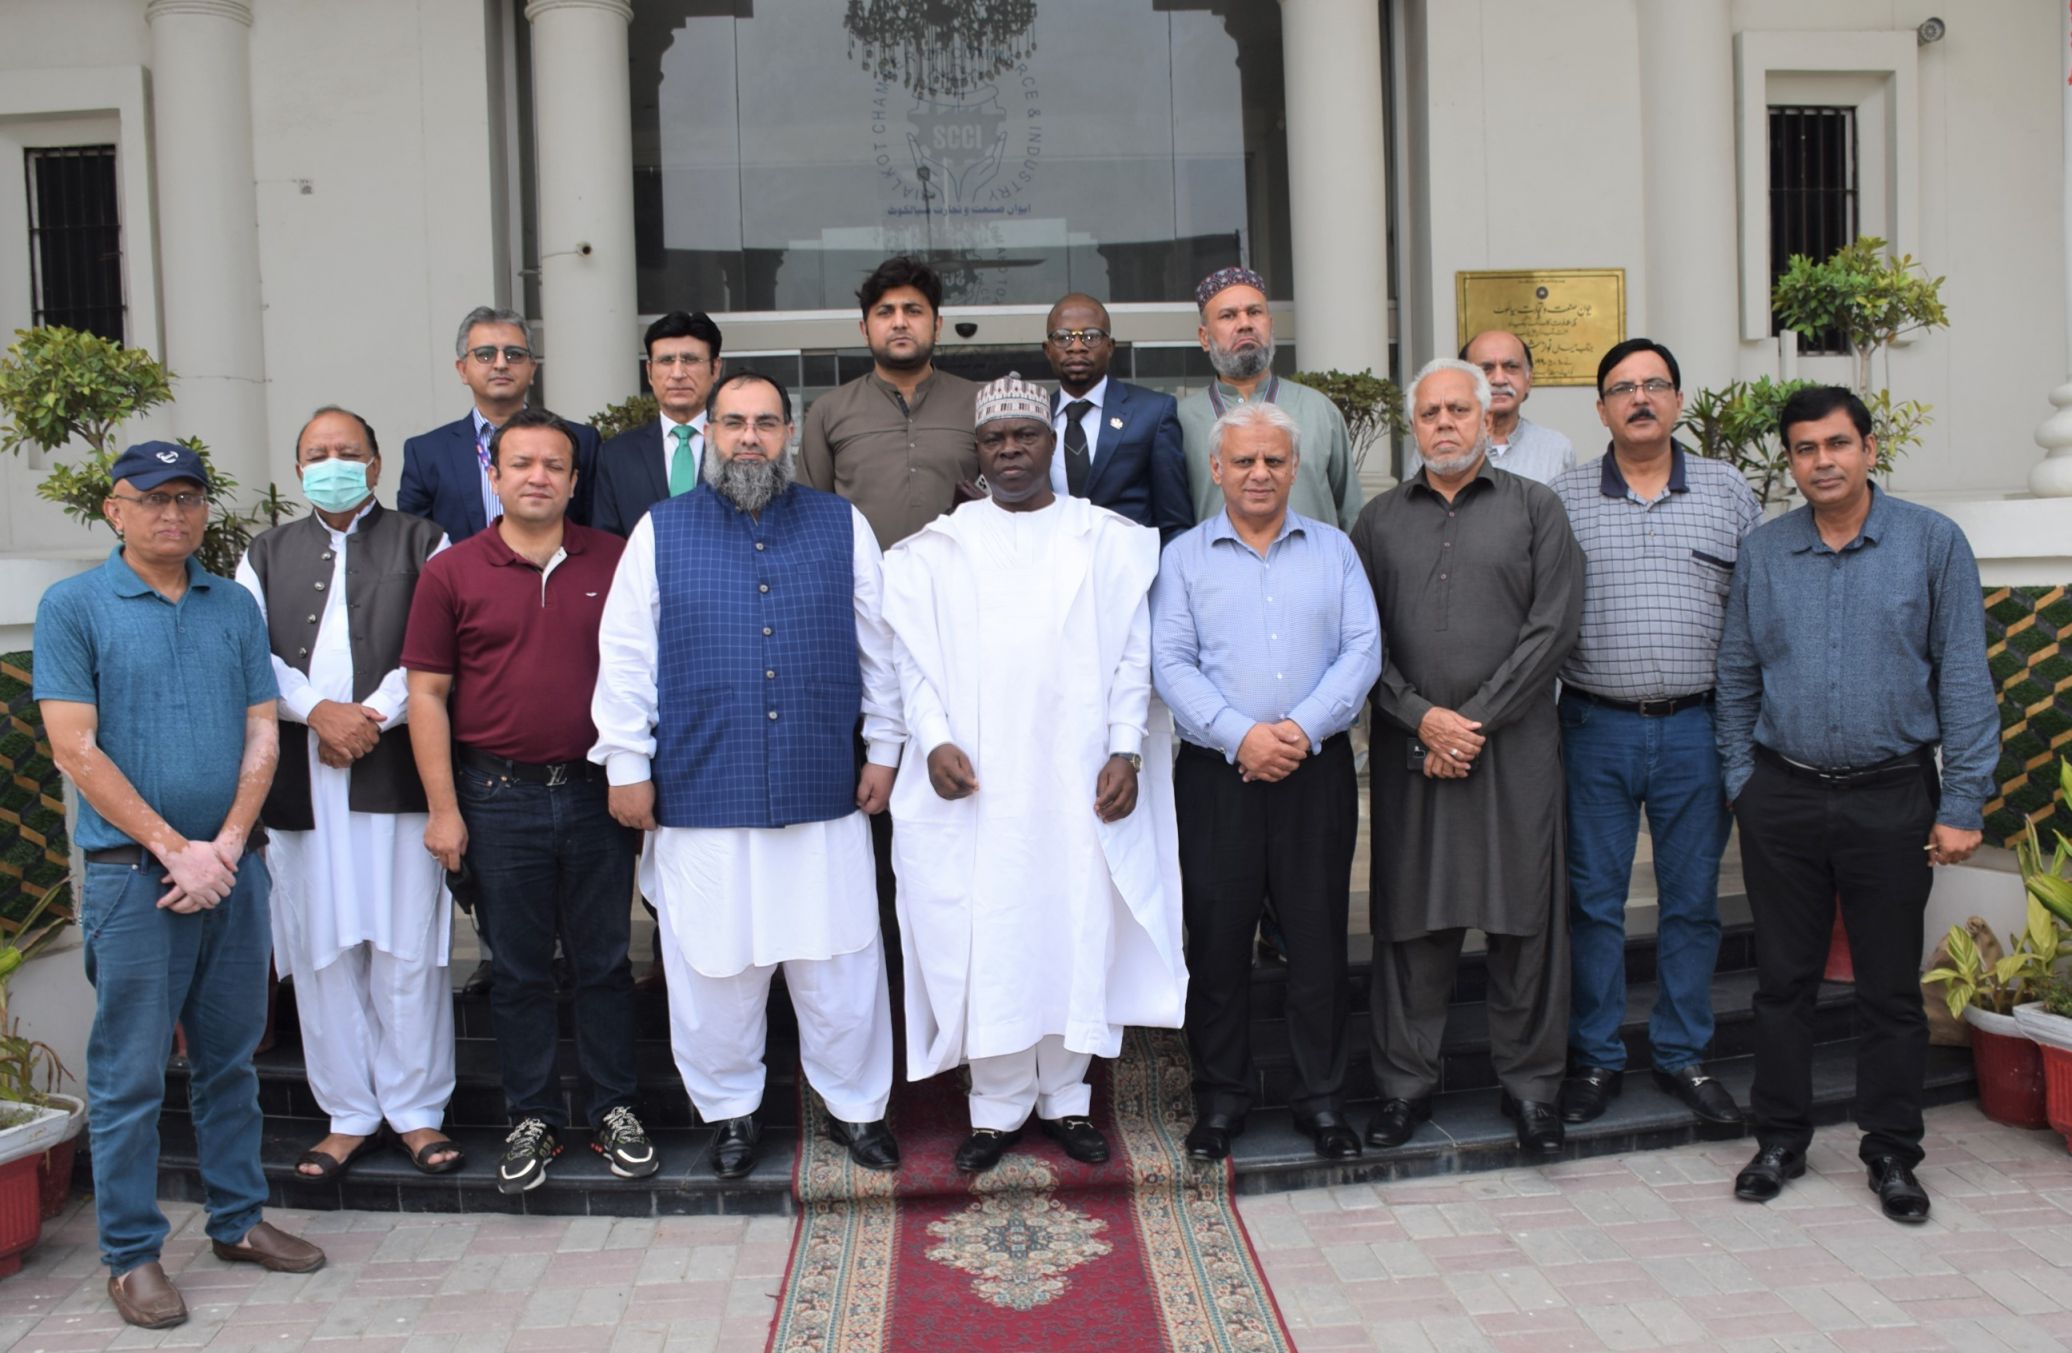 On August 09, 2021, H.E. Mohammad Bello Abioye, High Commissioner of Republic of Nigeria to Pakistan visited The Sialkot Chamber of Commerce and Industry to interact with the business community of Sialkot in order to discuss the issues of mutual interest that would facilitate in expansion of bilateral trade between the both countries.   Mr. Khuram Aslam, Senior Vice President and Mr. Ansar Aziz Puri, Vice President, SCCI warmly welcomed the High Commissioner and exchanged their views with H.E. for enhancing the mutual trade relations by exchanging trade delegations, participating in trade fairs and organizing business conference between both countries with the aim to increase business activities.   H.E. Mohammad Bello Abioye expressed his gratitude for the warm welcome and cooperation by SCCI. H. E. welcomed the business community of Sialkot to build liaison with Nigeria in planning Trade exhibitions and joint ventures for increasing trade relations.